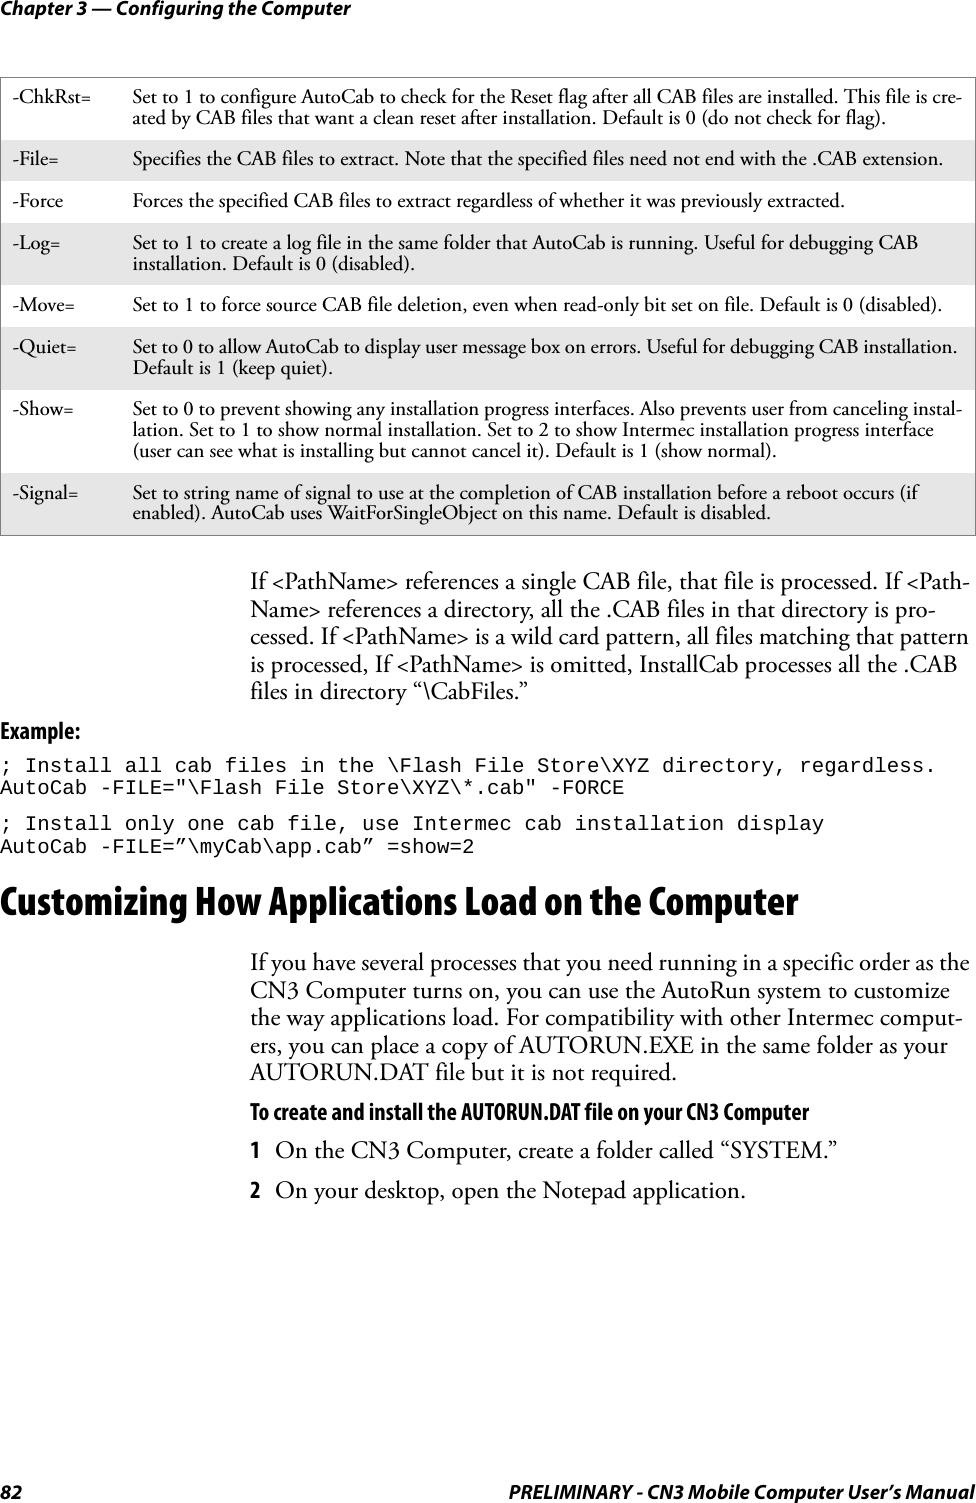 Chapter 3 — Configuring the Computer82 PRELIMINARY - CN3 Mobile Computer User’s ManualIf &lt;PathName&gt; references a single CAB file, that file is processed. If &lt;Path-Name&gt; references a directory, all the .CAB files in that directory is pro-cessed. If &lt;PathName&gt; is a wild card pattern, all files matching that pattern is processed, If &lt;PathName&gt; is omitted, InstallCab processes all the .CAB files in directory “\CabFiles.”Example:; Install all cab files in the \Flash File Store\XYZ directory, regardless.AutoCab -FILE=&quot;\Flash File Store\XYZ\*.cab&quot; -FORCE; Install only one cab file, use Intermec cab installation displayAutoCab -FILE=”\myCab\app.cab” =show=2Customizing How Applications Load on the ComputerIf you have several processes that you need running in a specific order as the CN3 Computer turns on, you can use the AutoRun system to customize the way applications load. For compatibility with other Intermec comput-ers, you can place a copy of AUTORUN.EXE in the same folder as your AUTORUN.DAT file but it is not required.To create and install the AUTORUN.DAT file on your CN3 Computer1On the CN3 Computer, create a folder called “SYSTEM.”2On your desktop, open the Notepad application.-ChkRst= Set to 1 to configure AutoCab to check for the Reset flag after all CAB files are installed. This file is cre-ated by CAB files that want a clean reset after installation. Default is 0 (do not check for flag).-File= Specifies the CAB files to extract. Note that the specified files need not end with the .CAB extension.-Force Forces the specified CAB files to extract regardless of whether it was previously extracted.-Log= Set to 1 to create a log file in the same folder that AutoCab is running. Useful for debugging CAB installation. Default is 0 (disabled).-Move= Set to 1 to force source CAB file deletion, even when read-only bit set on file. Default is 0 (disabled).-Quiet= Set to 0 to allow AutoCab to display user message box on errors. Useful for debugging CAB installation. Default is 1 (keep quiet).-Show= Set to 0 to prevent showing any installation progress interfaces. Also prevents user from canceling instal-lation. Set to 1 to show normal installation. Set to 2 to show Intermec installation progress interface (user can see what is installing but cannot cancel it). Default is 1 (show normal).-Signal= Set to string name of signal to use at the completion of CAB installation before a reboot occurs (if enabled). AutoCab uses WaitForSingleObject on this name. Default is disabled.